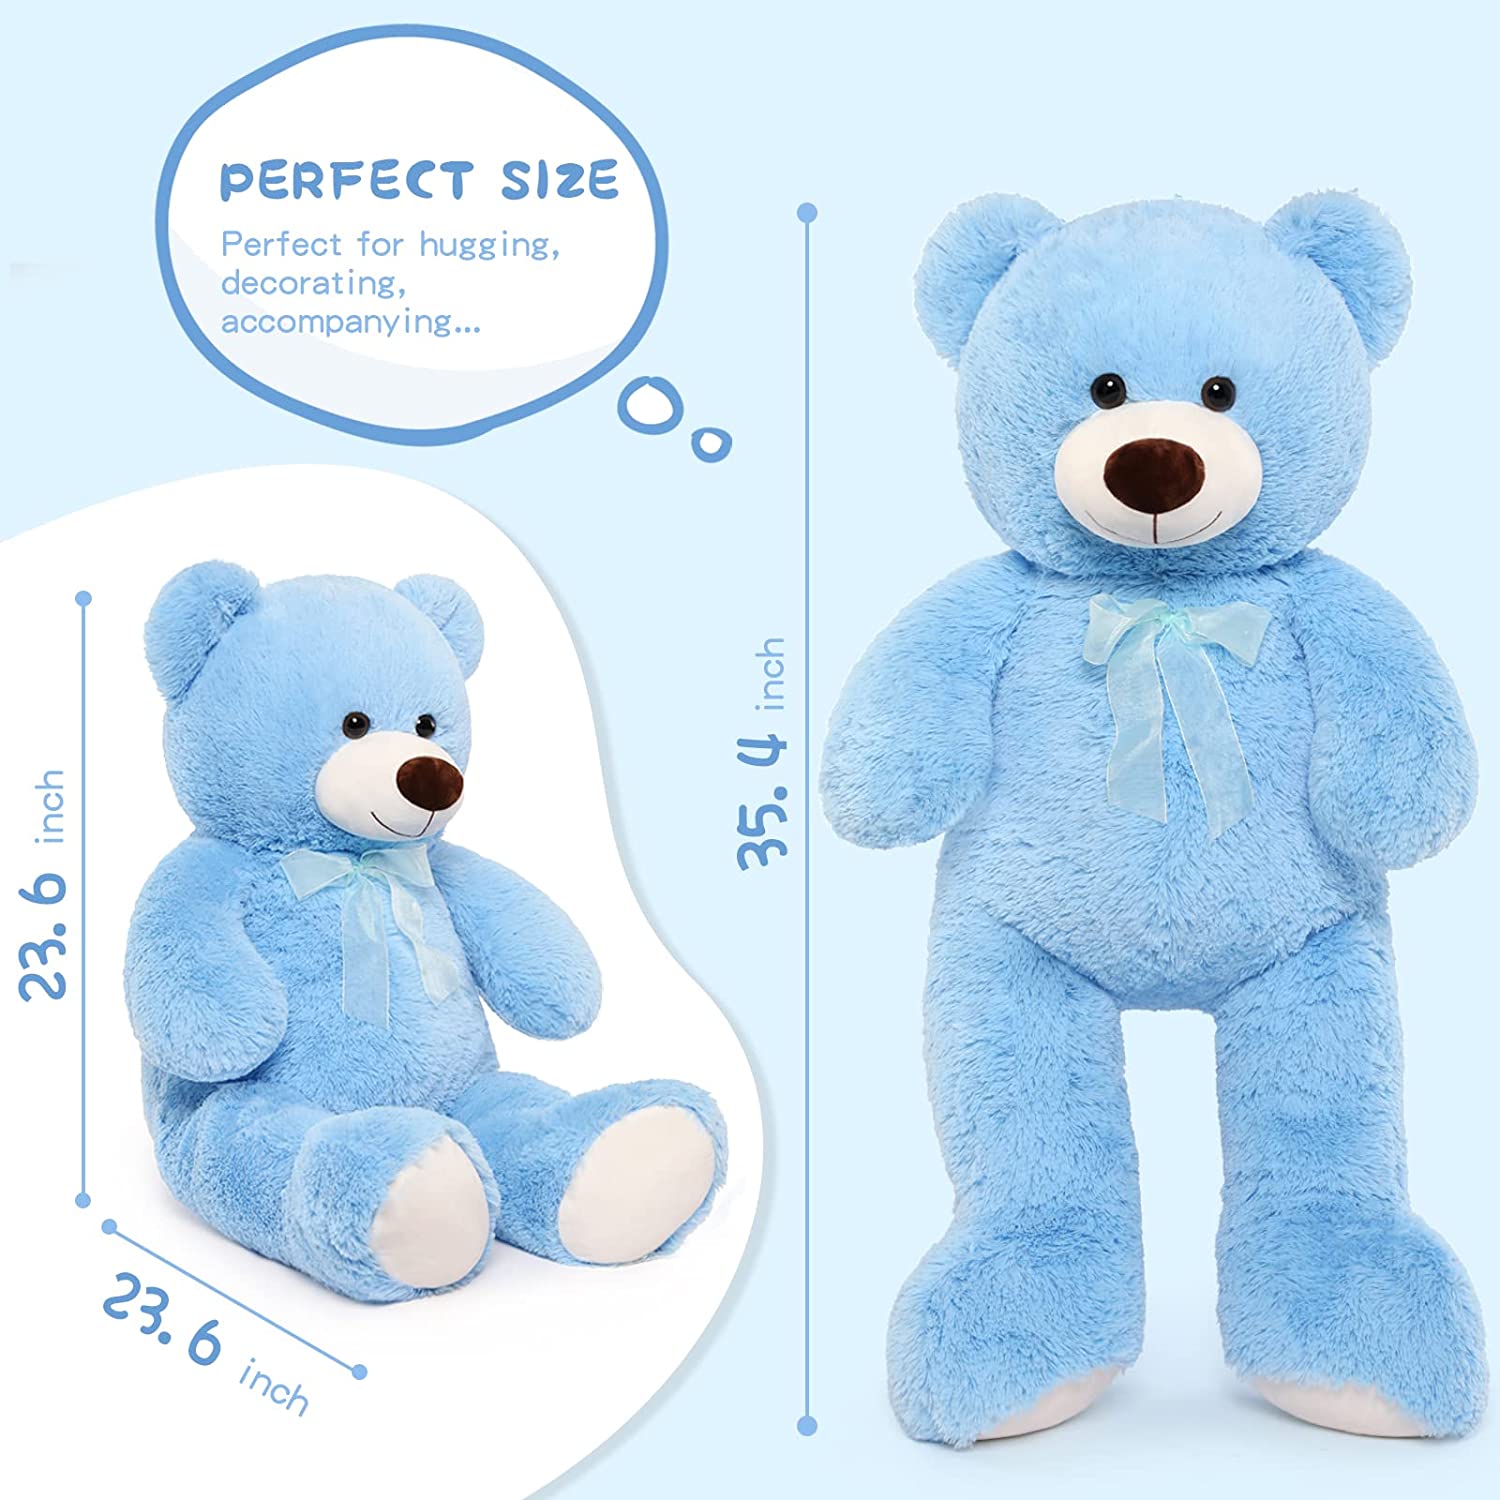 Giant Teddy Bear Plush Toy, Multicolor, 35.4/51 Inches